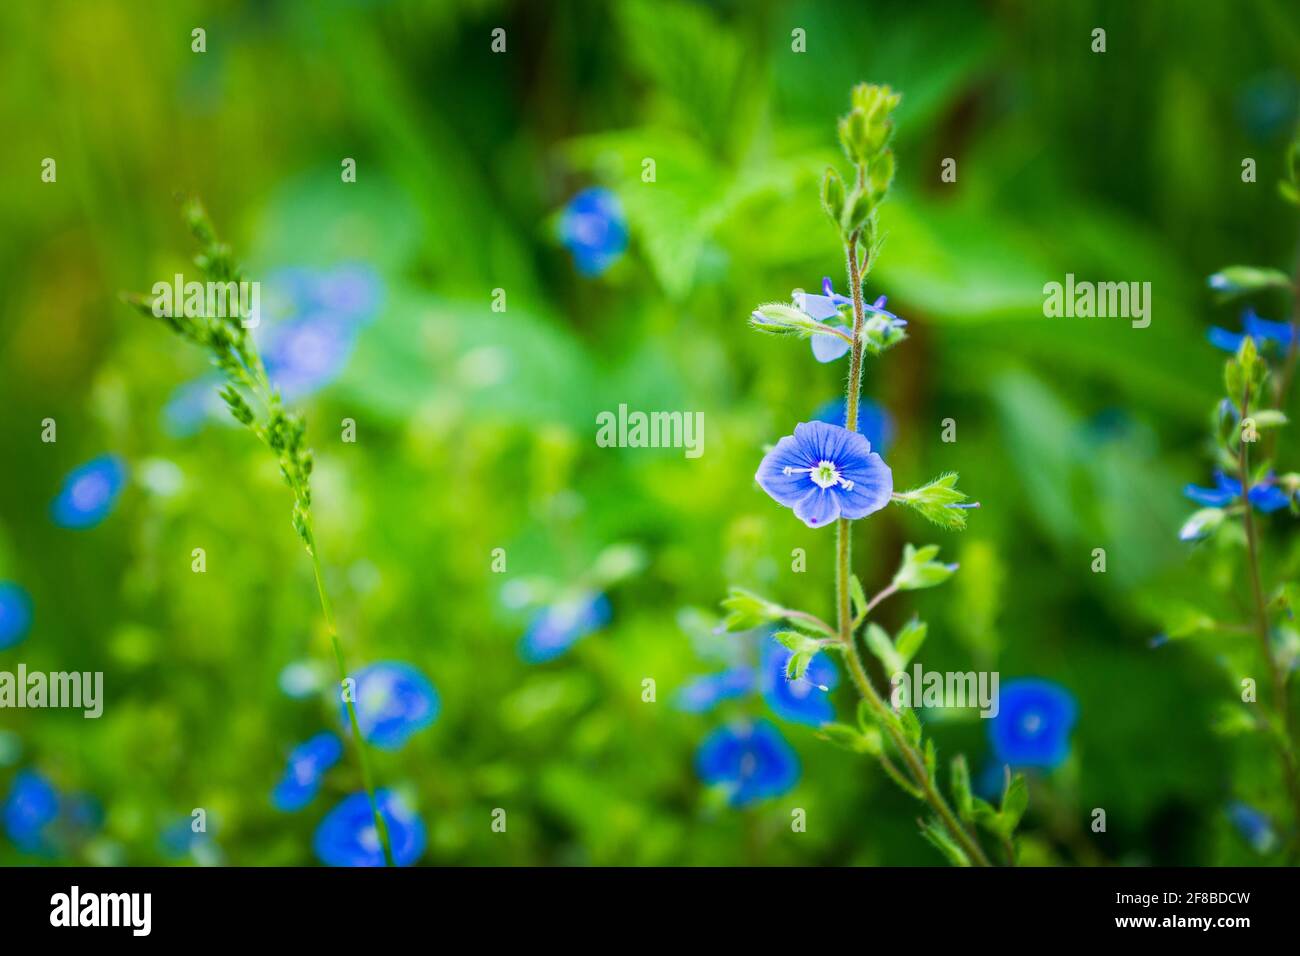 Blooming Veronica Officinalis flower. Shallow depth of field. Stock Photo